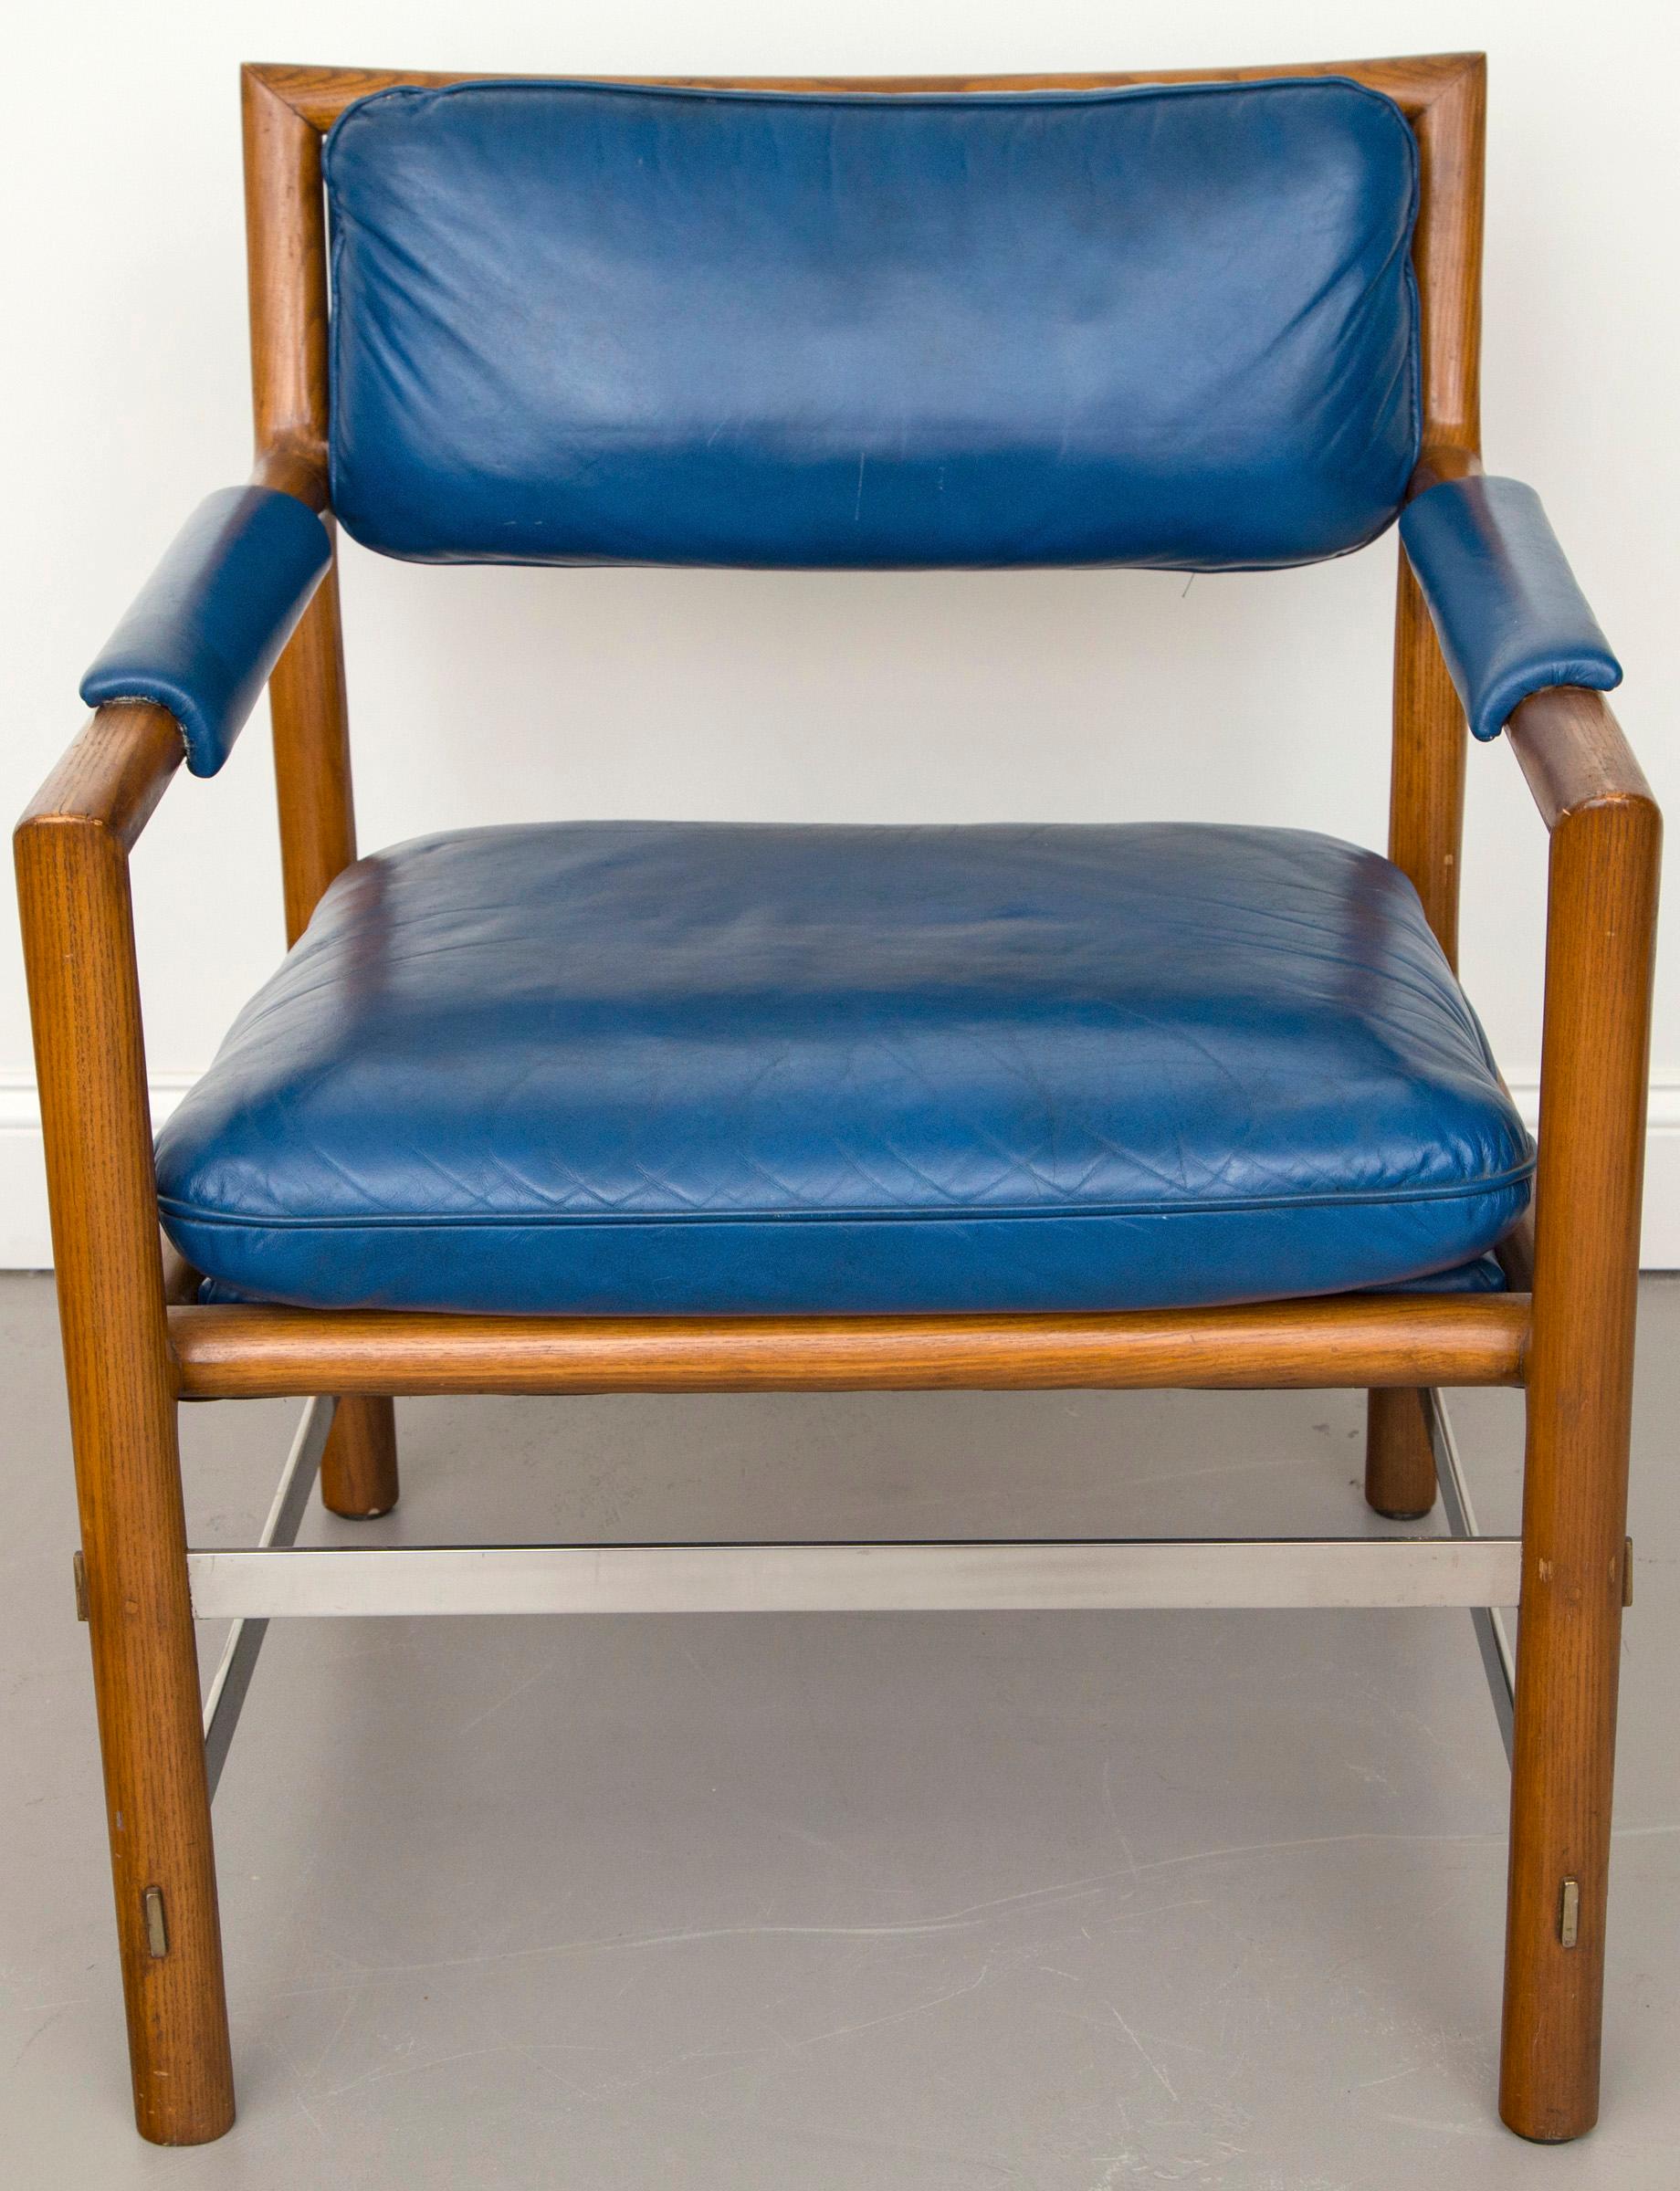 American Ed Wormley for Dunbar Blue Leather, Wood and Stainless Steel Chairs, Set of 4